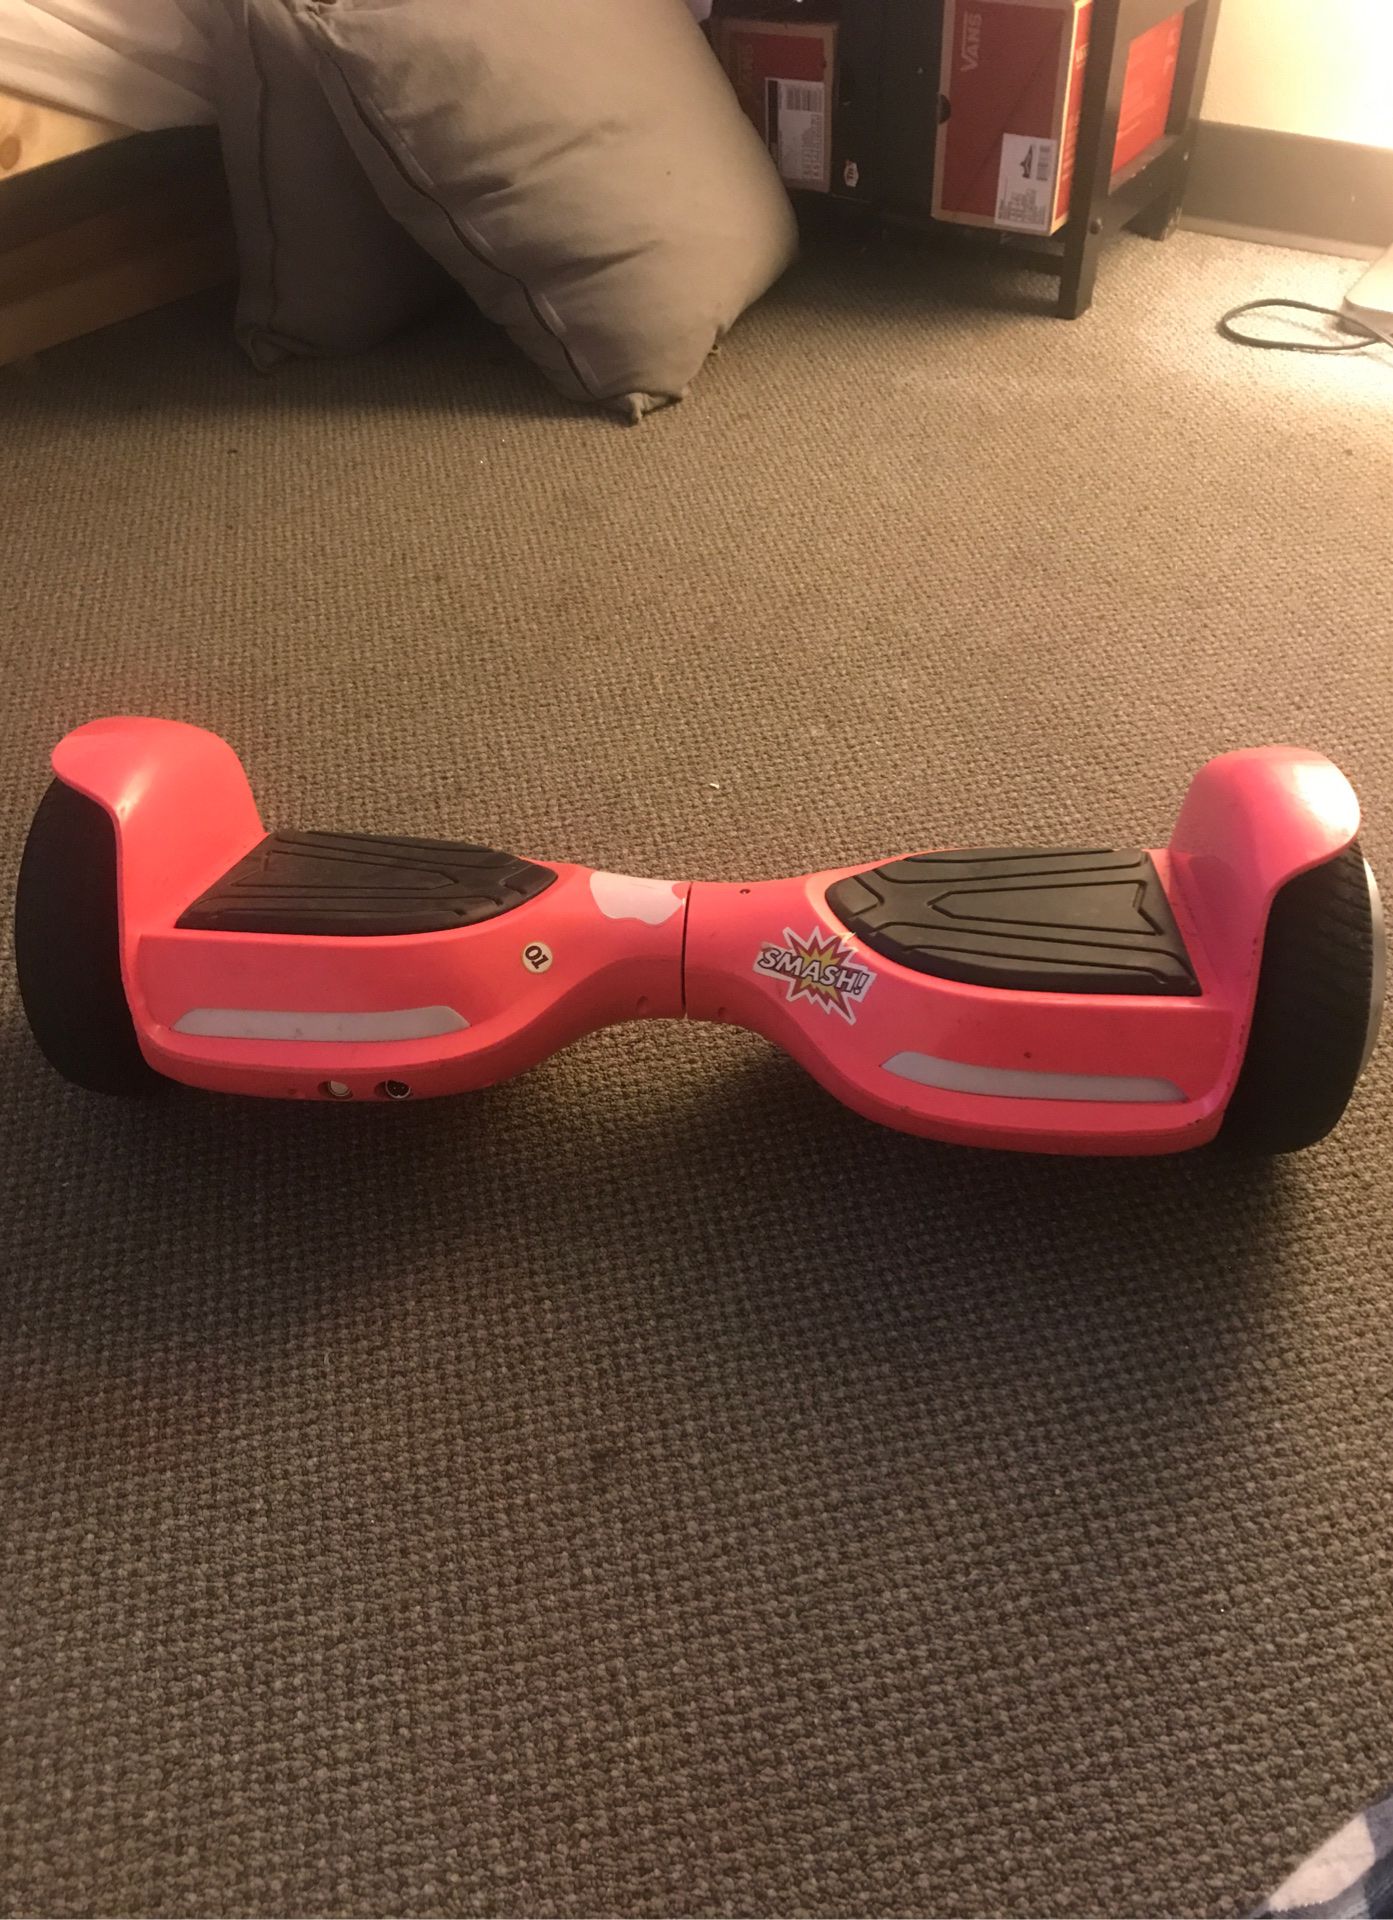 Bluetooth hoverboard